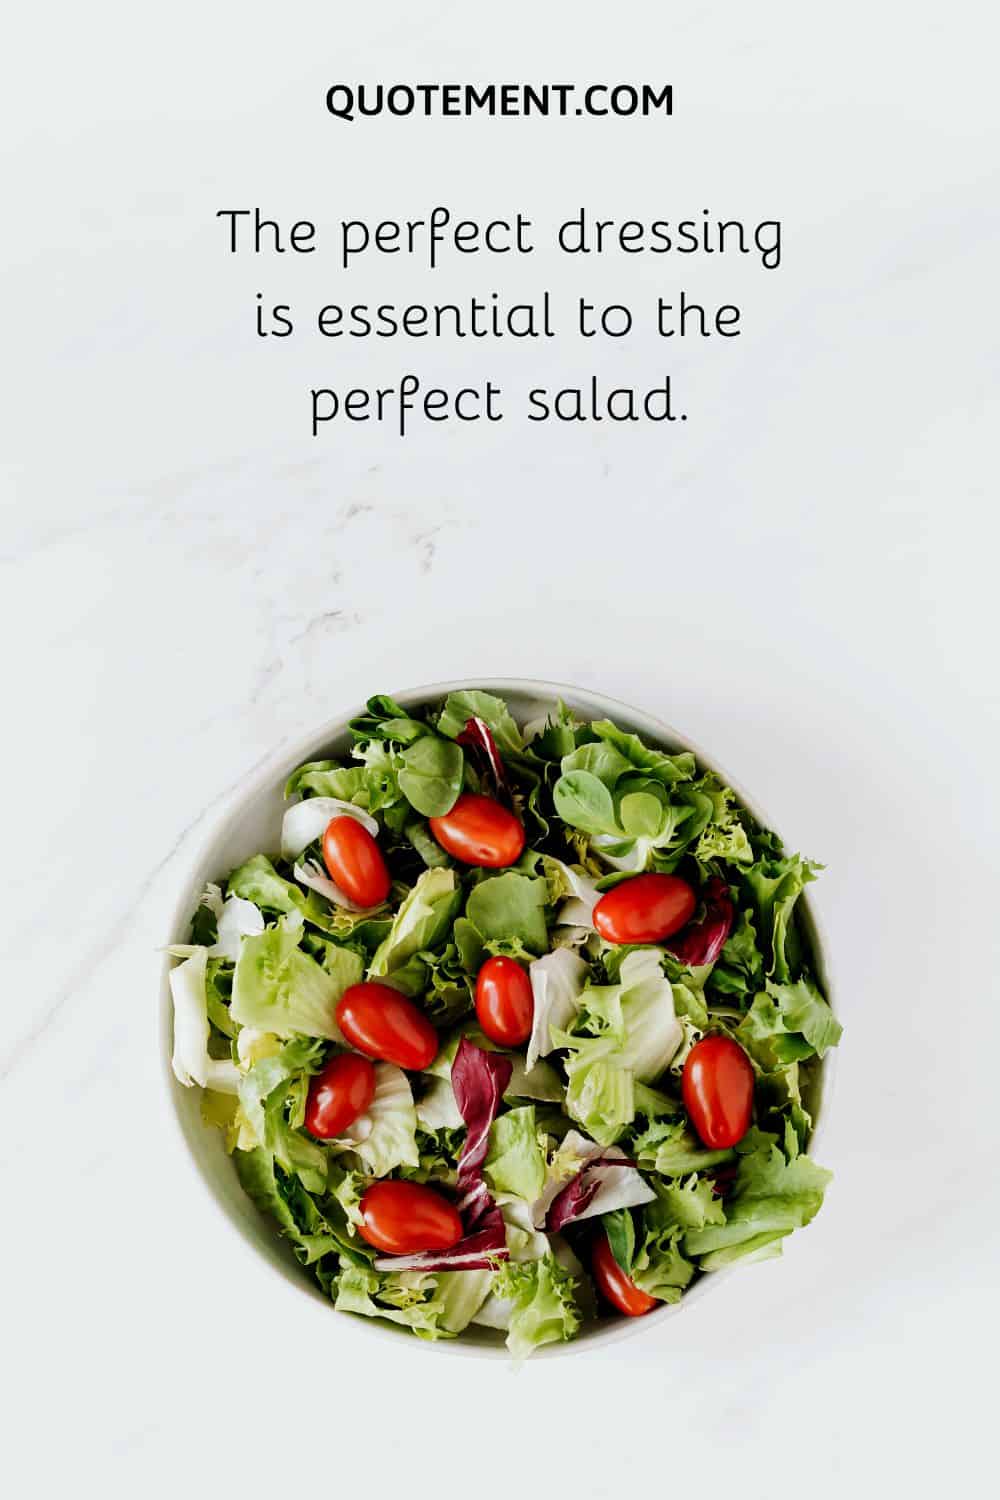 The perfect dressing is essential to the perfect salad